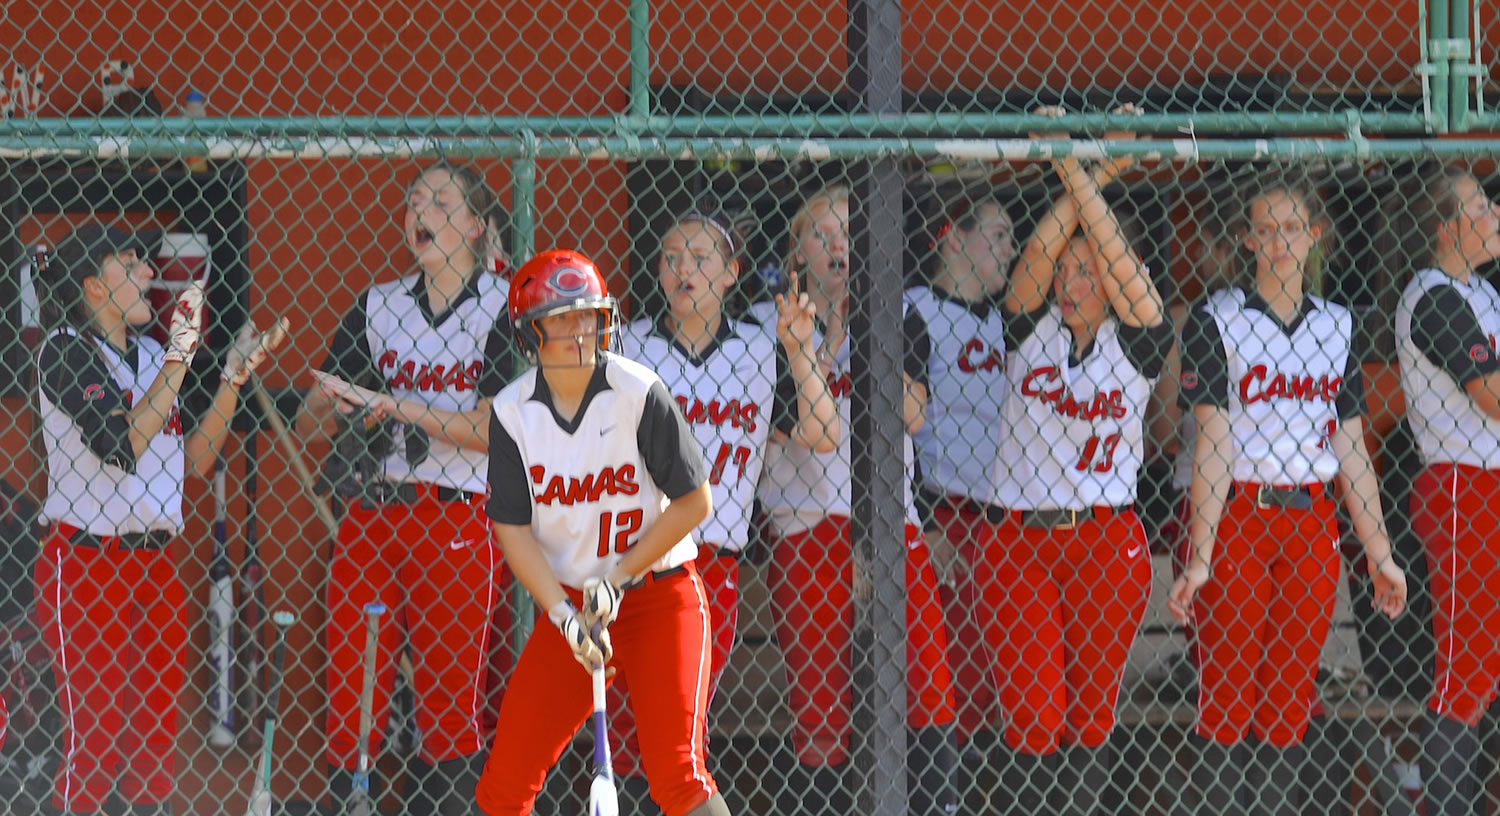 Camas players cheer on their teammates against Battle Ground in the 4A District Softball Championship in Battle Ground on May 20, 2015.